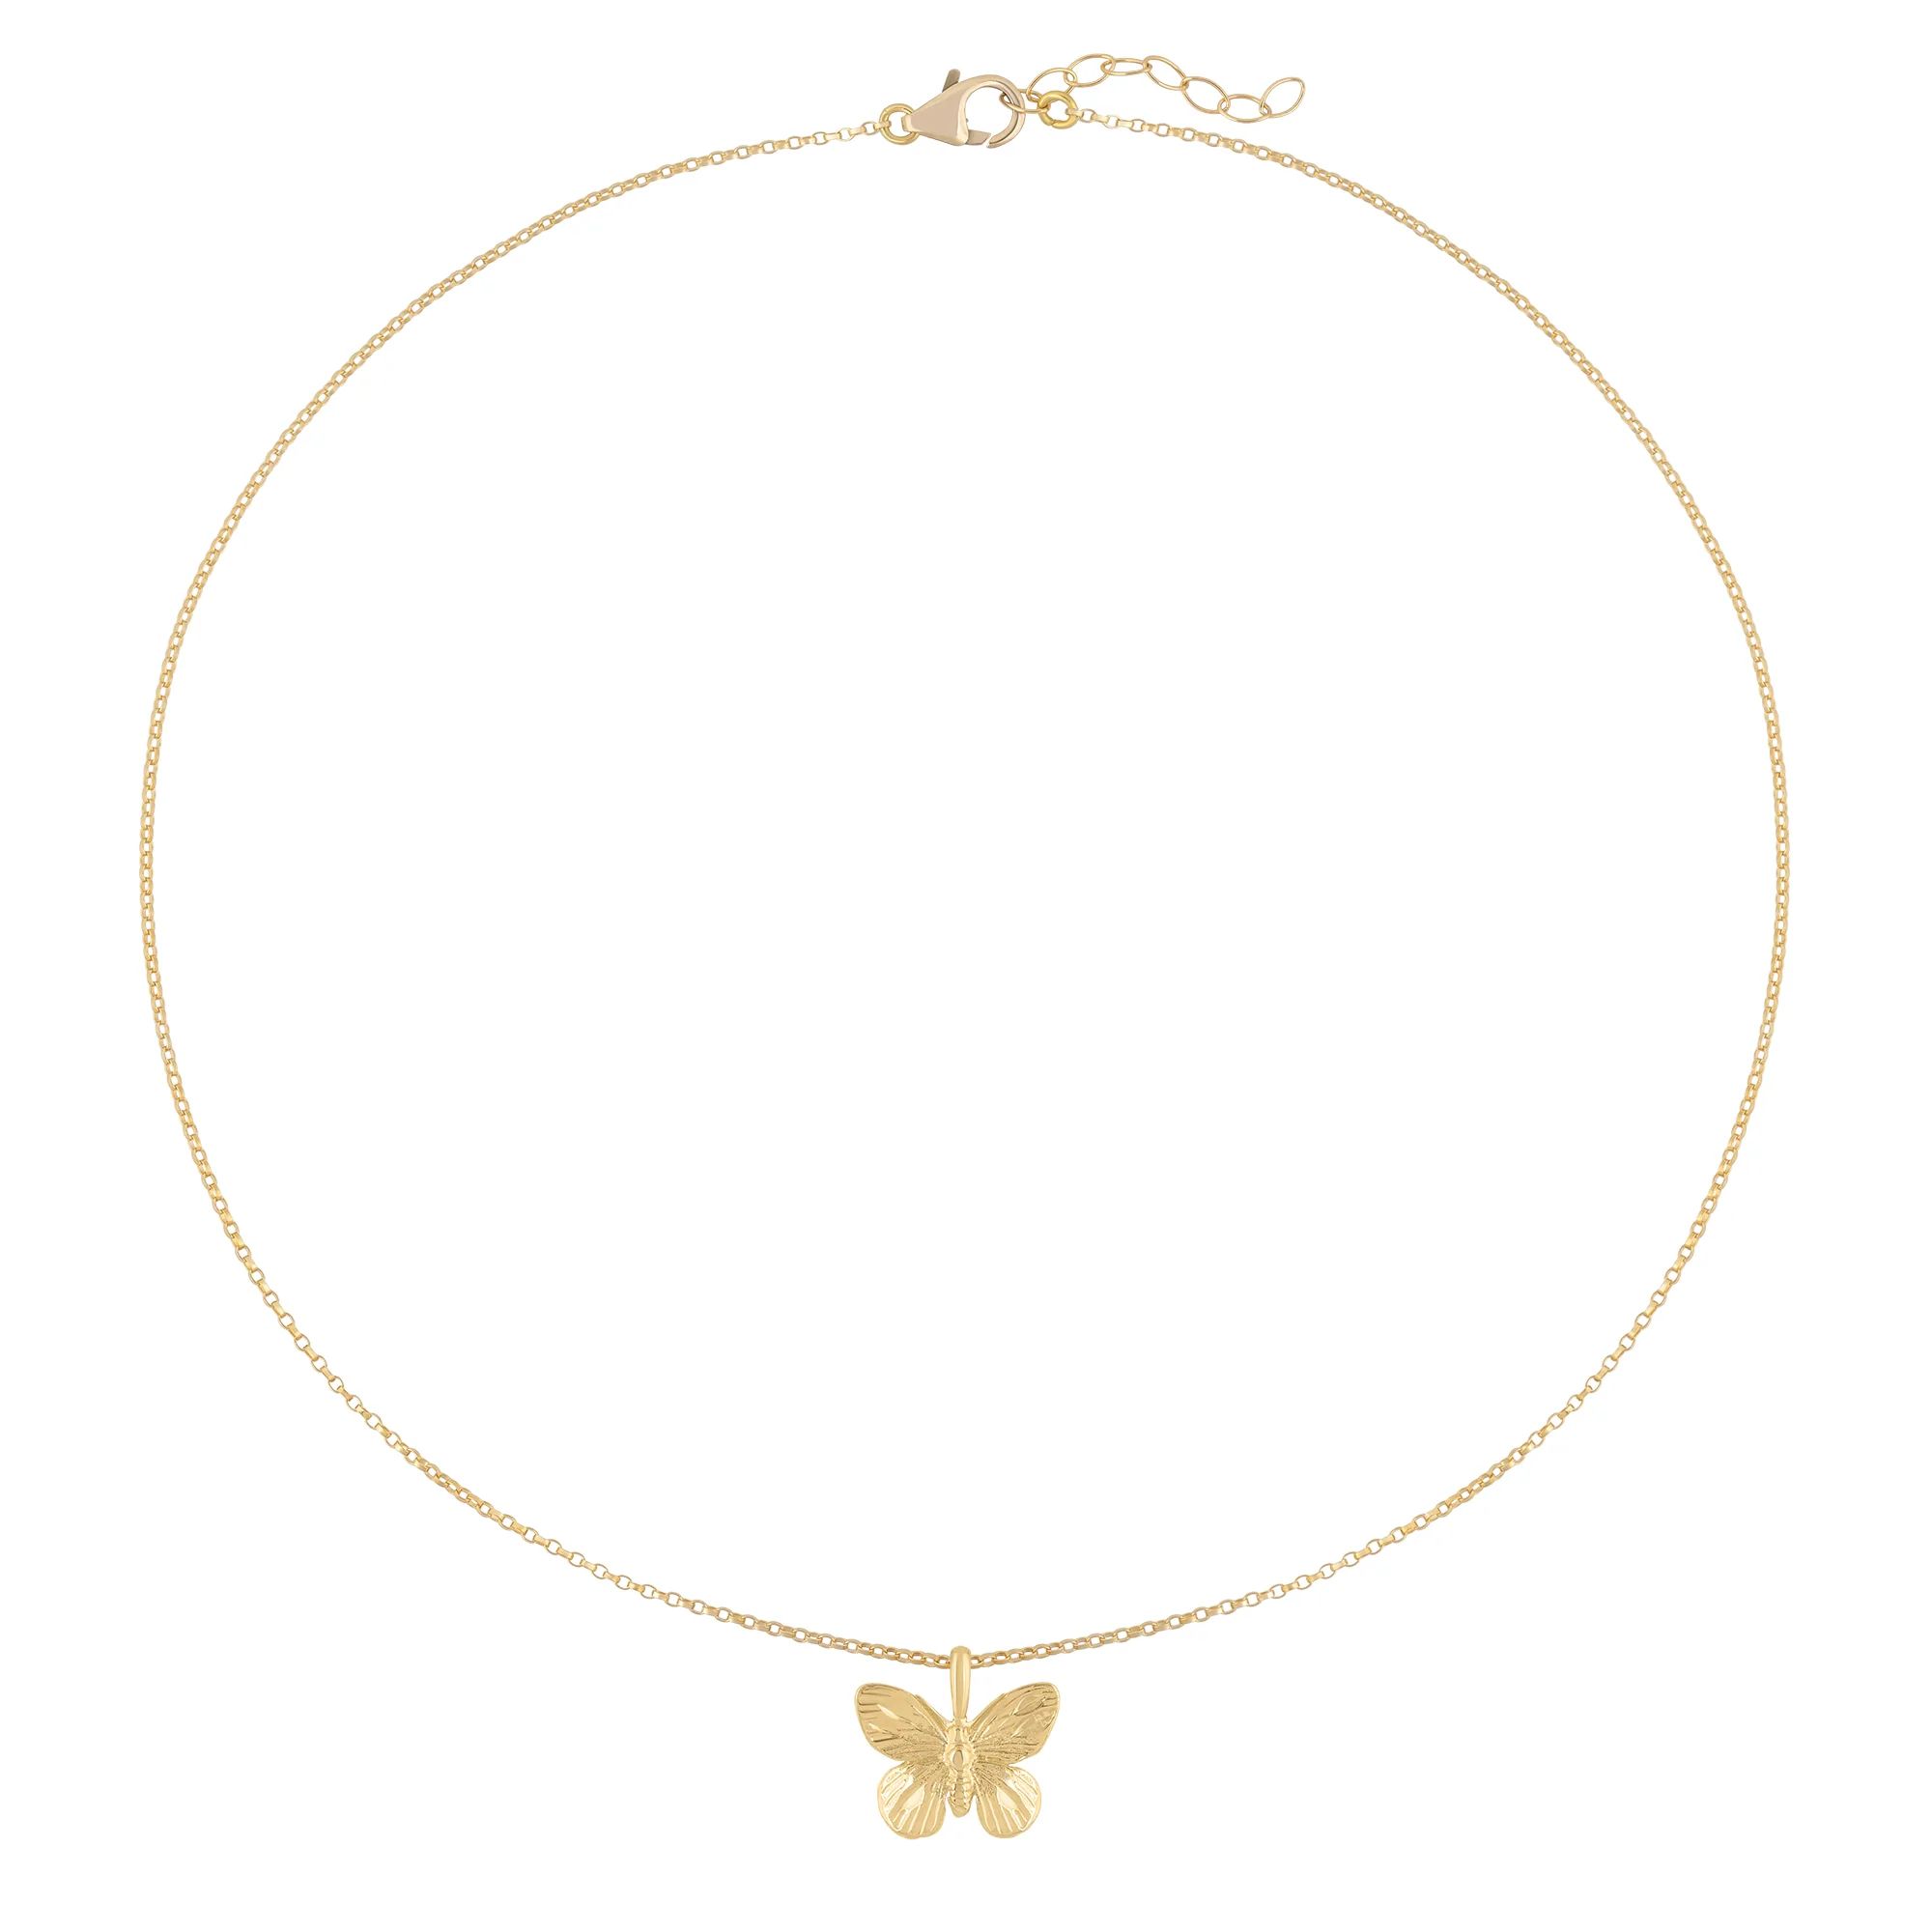 Flutter Necklace | Electric Picks Jewelry